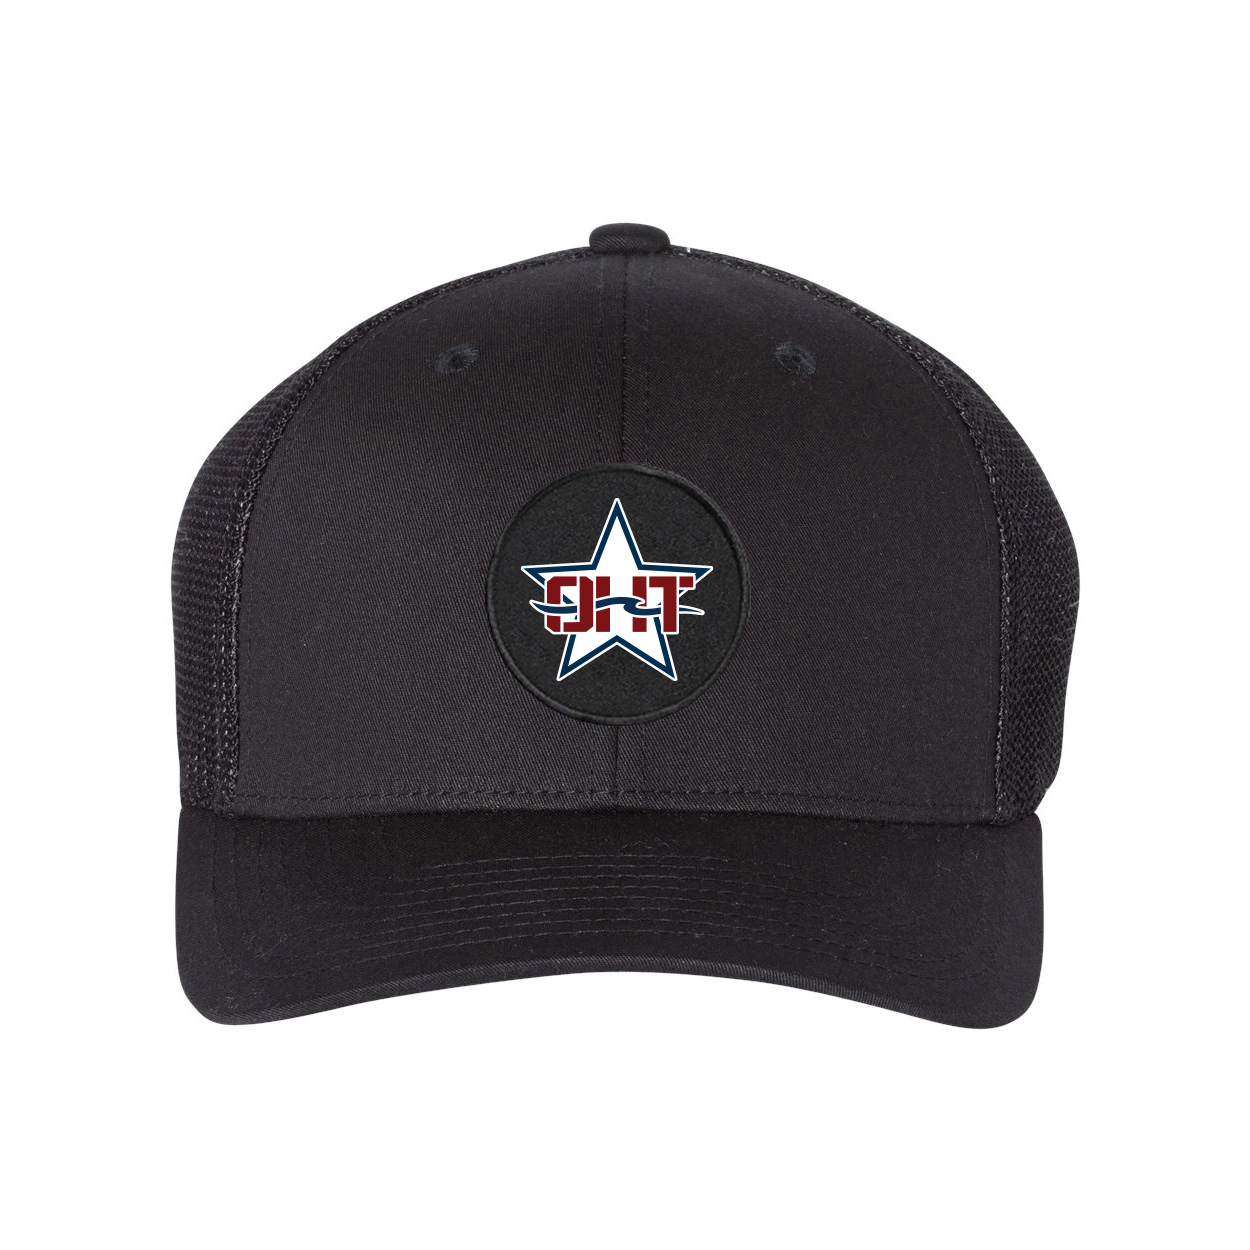 Our Heroes Tour Classic Woven Circle Patch Snapback Trucker Hat Black 